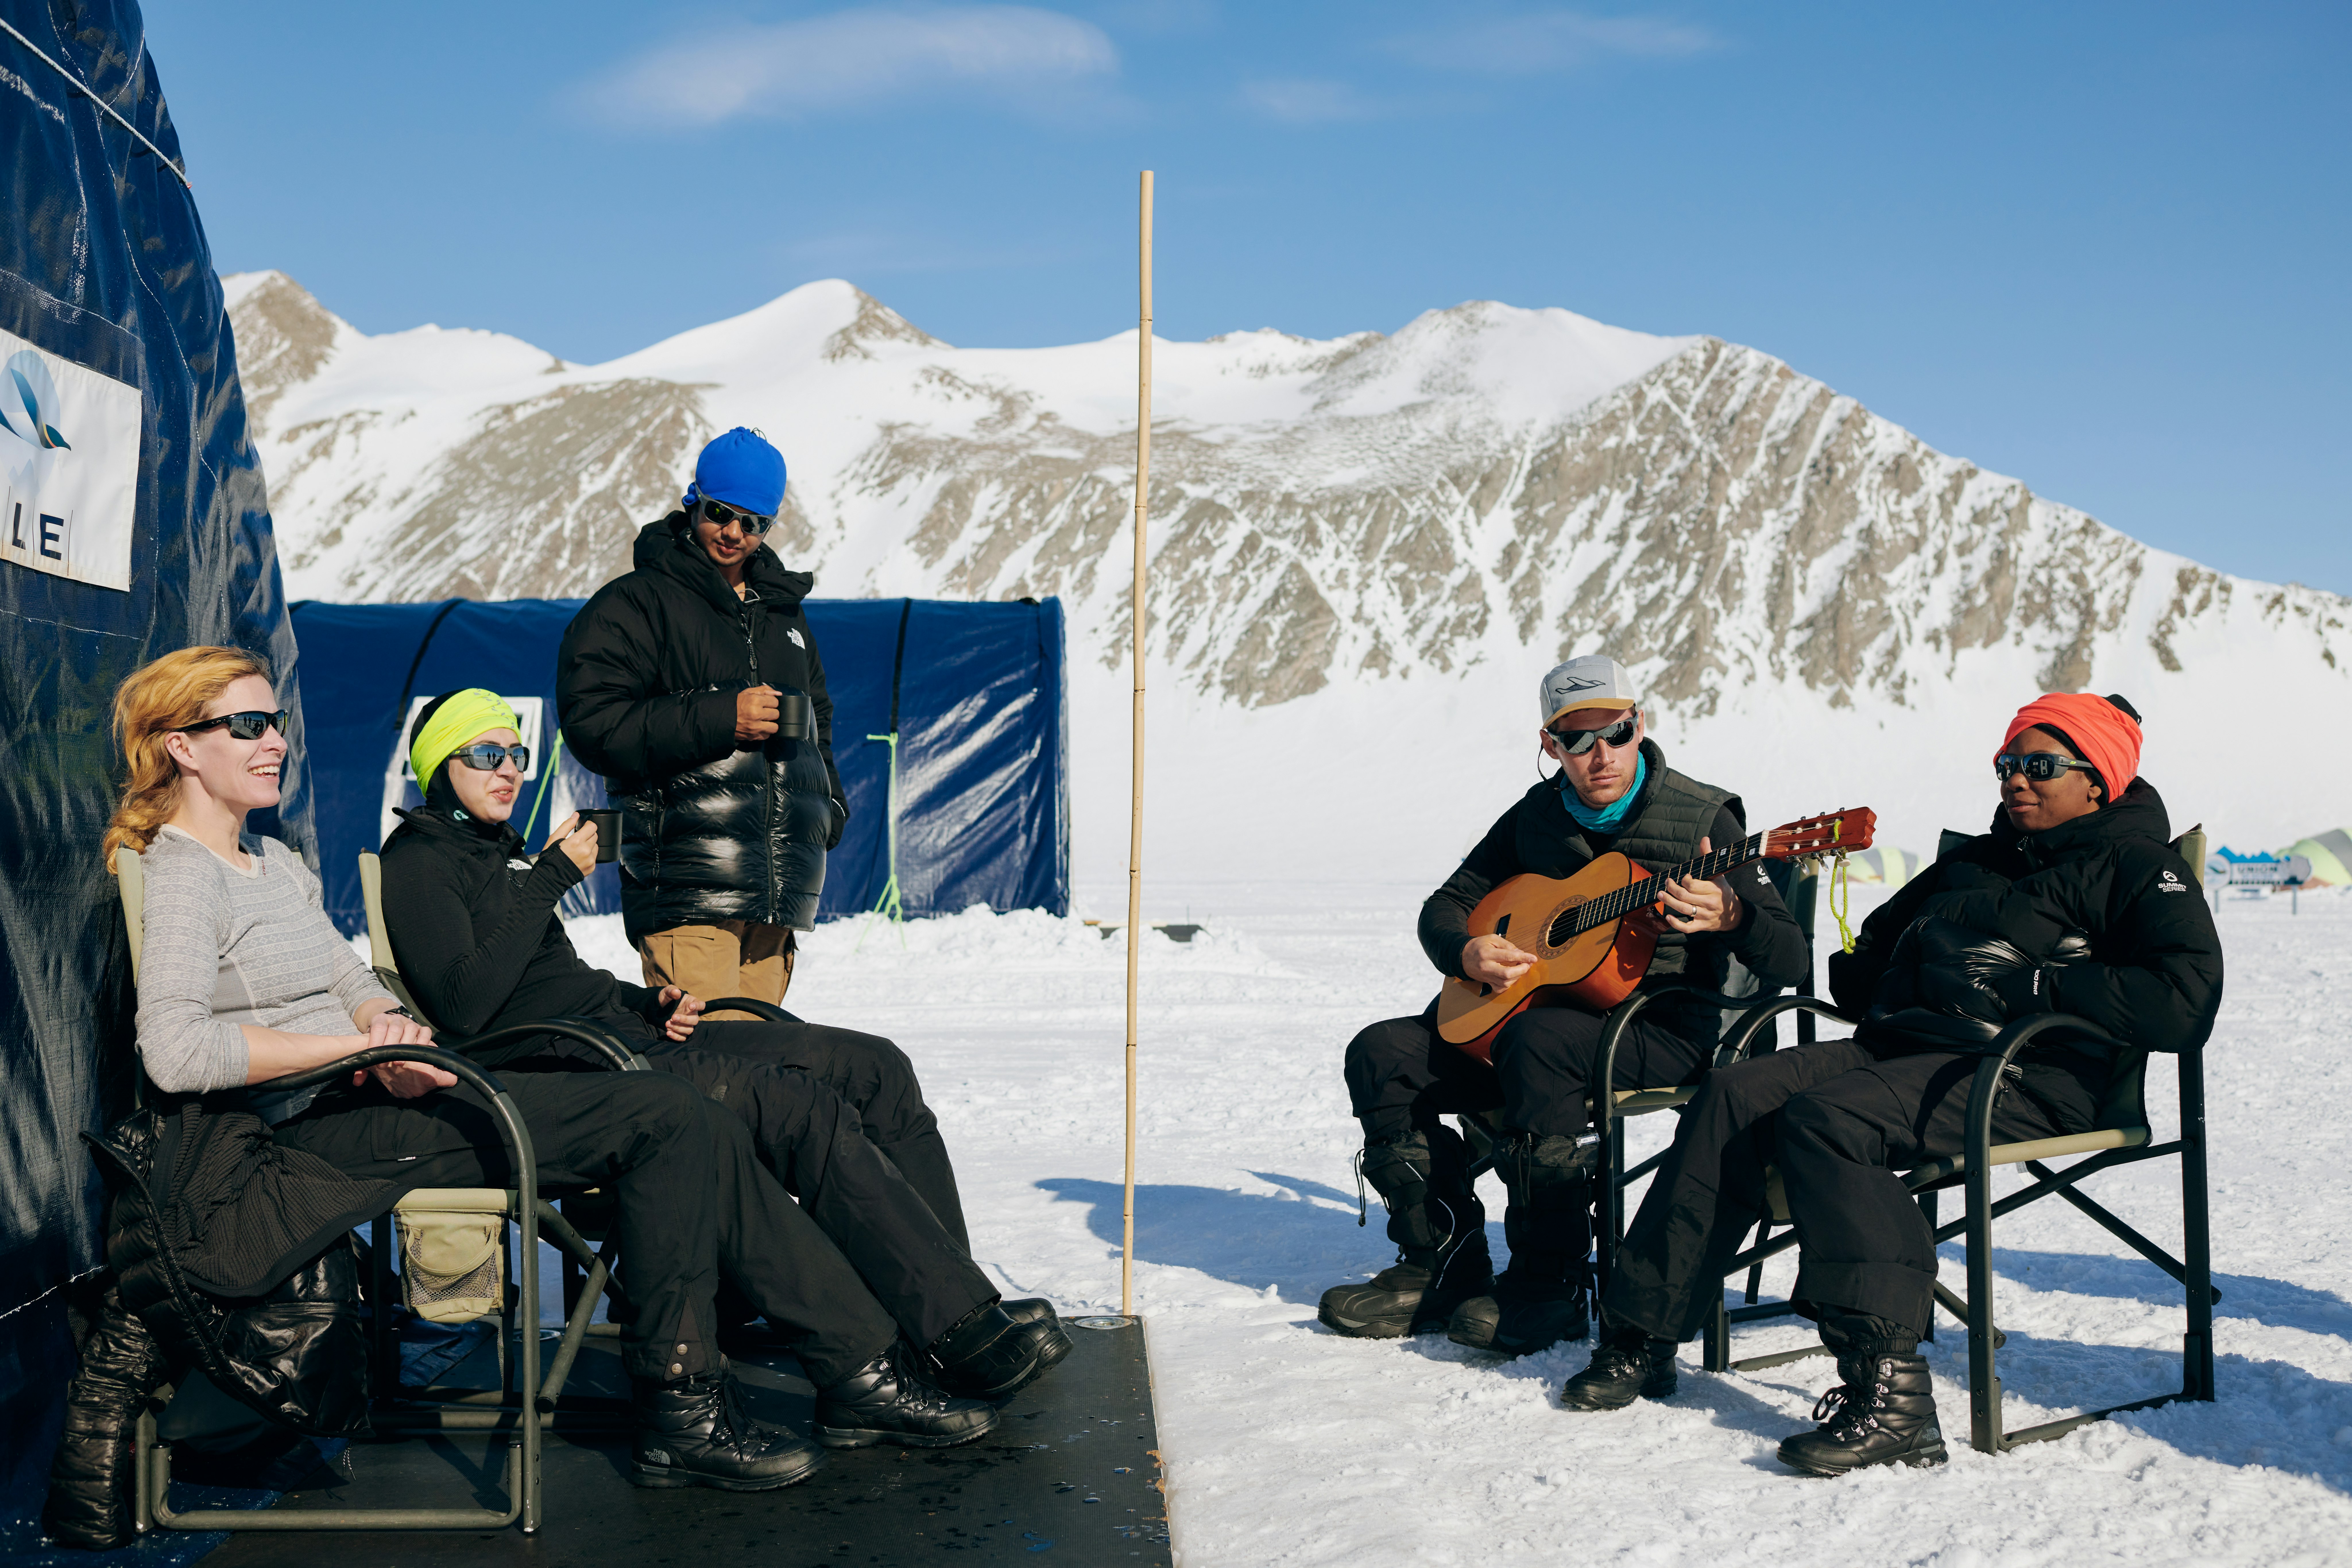 A group of volunteers sit on chairs and play guitar outside the tents of their Antarctica base camp